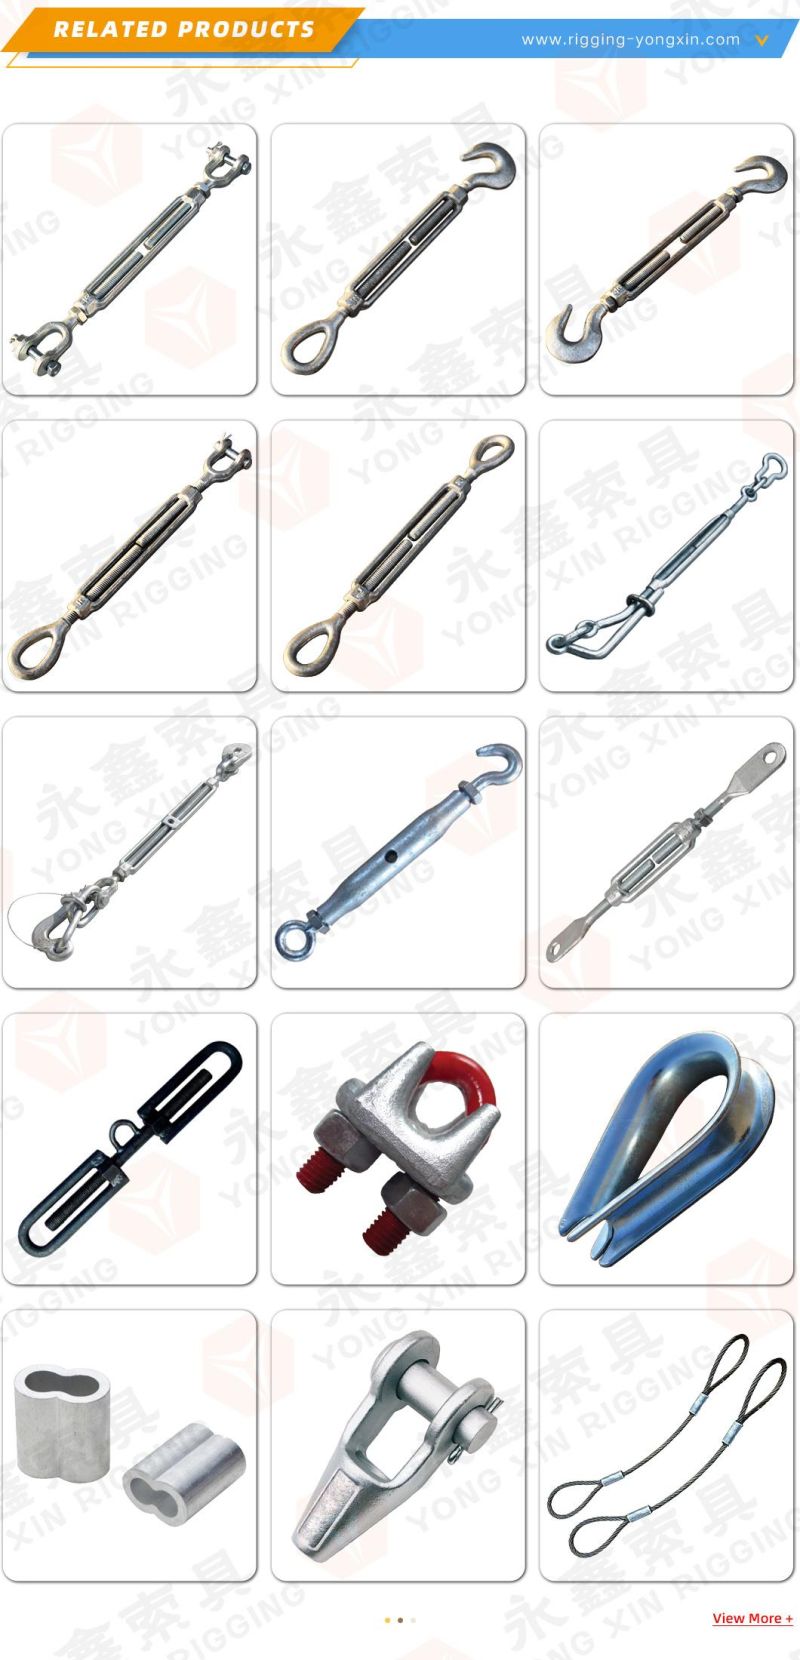 Jaw Turnbuckle Turnbuckle Turnbuckle 304/316 Stainless Steel Jaw to Jaw Closed Body Turnbuckle